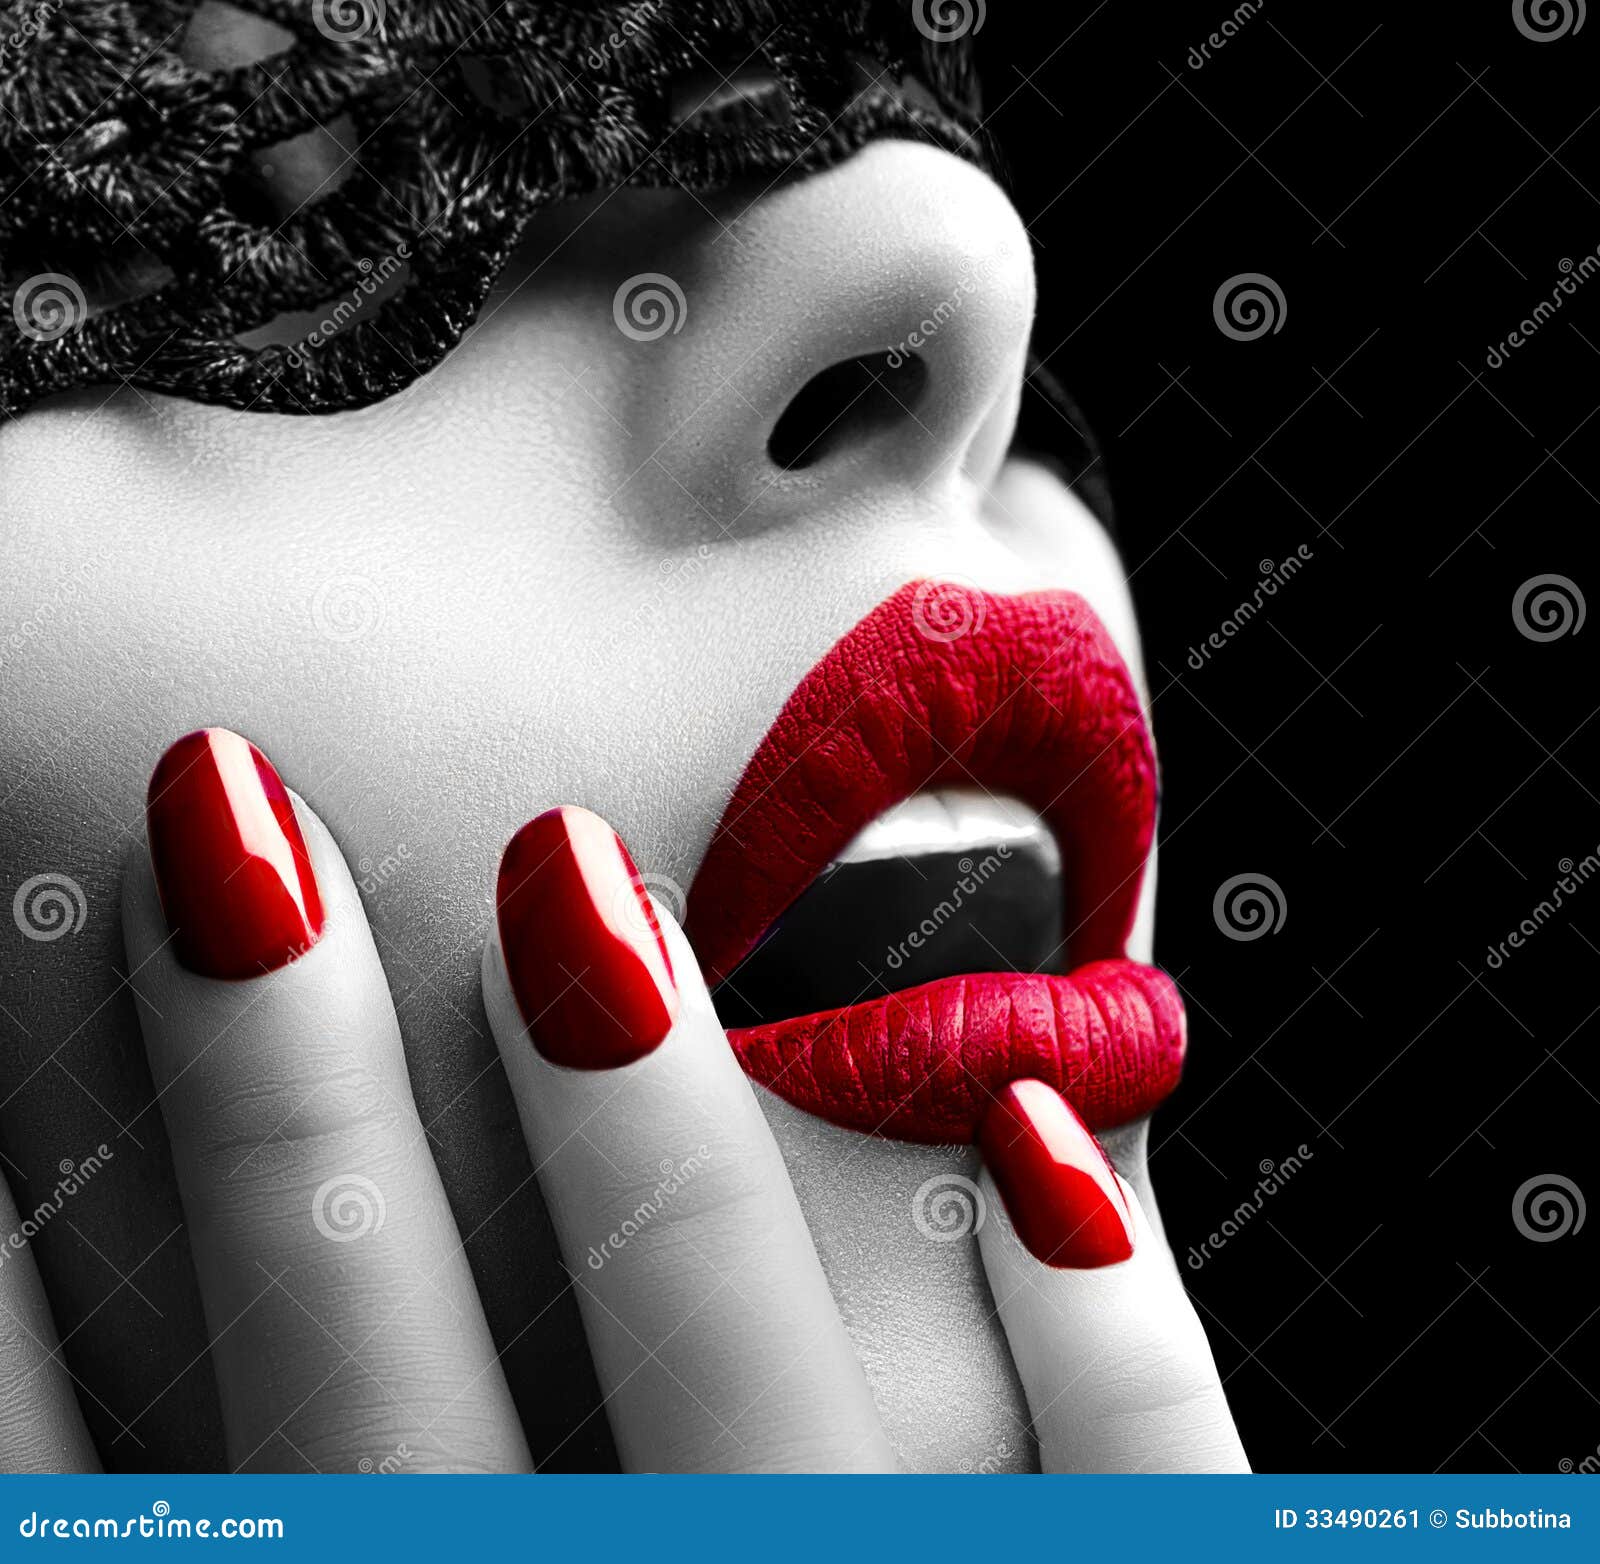 Woman With Black Lace Mask Stock Image Image 33490261